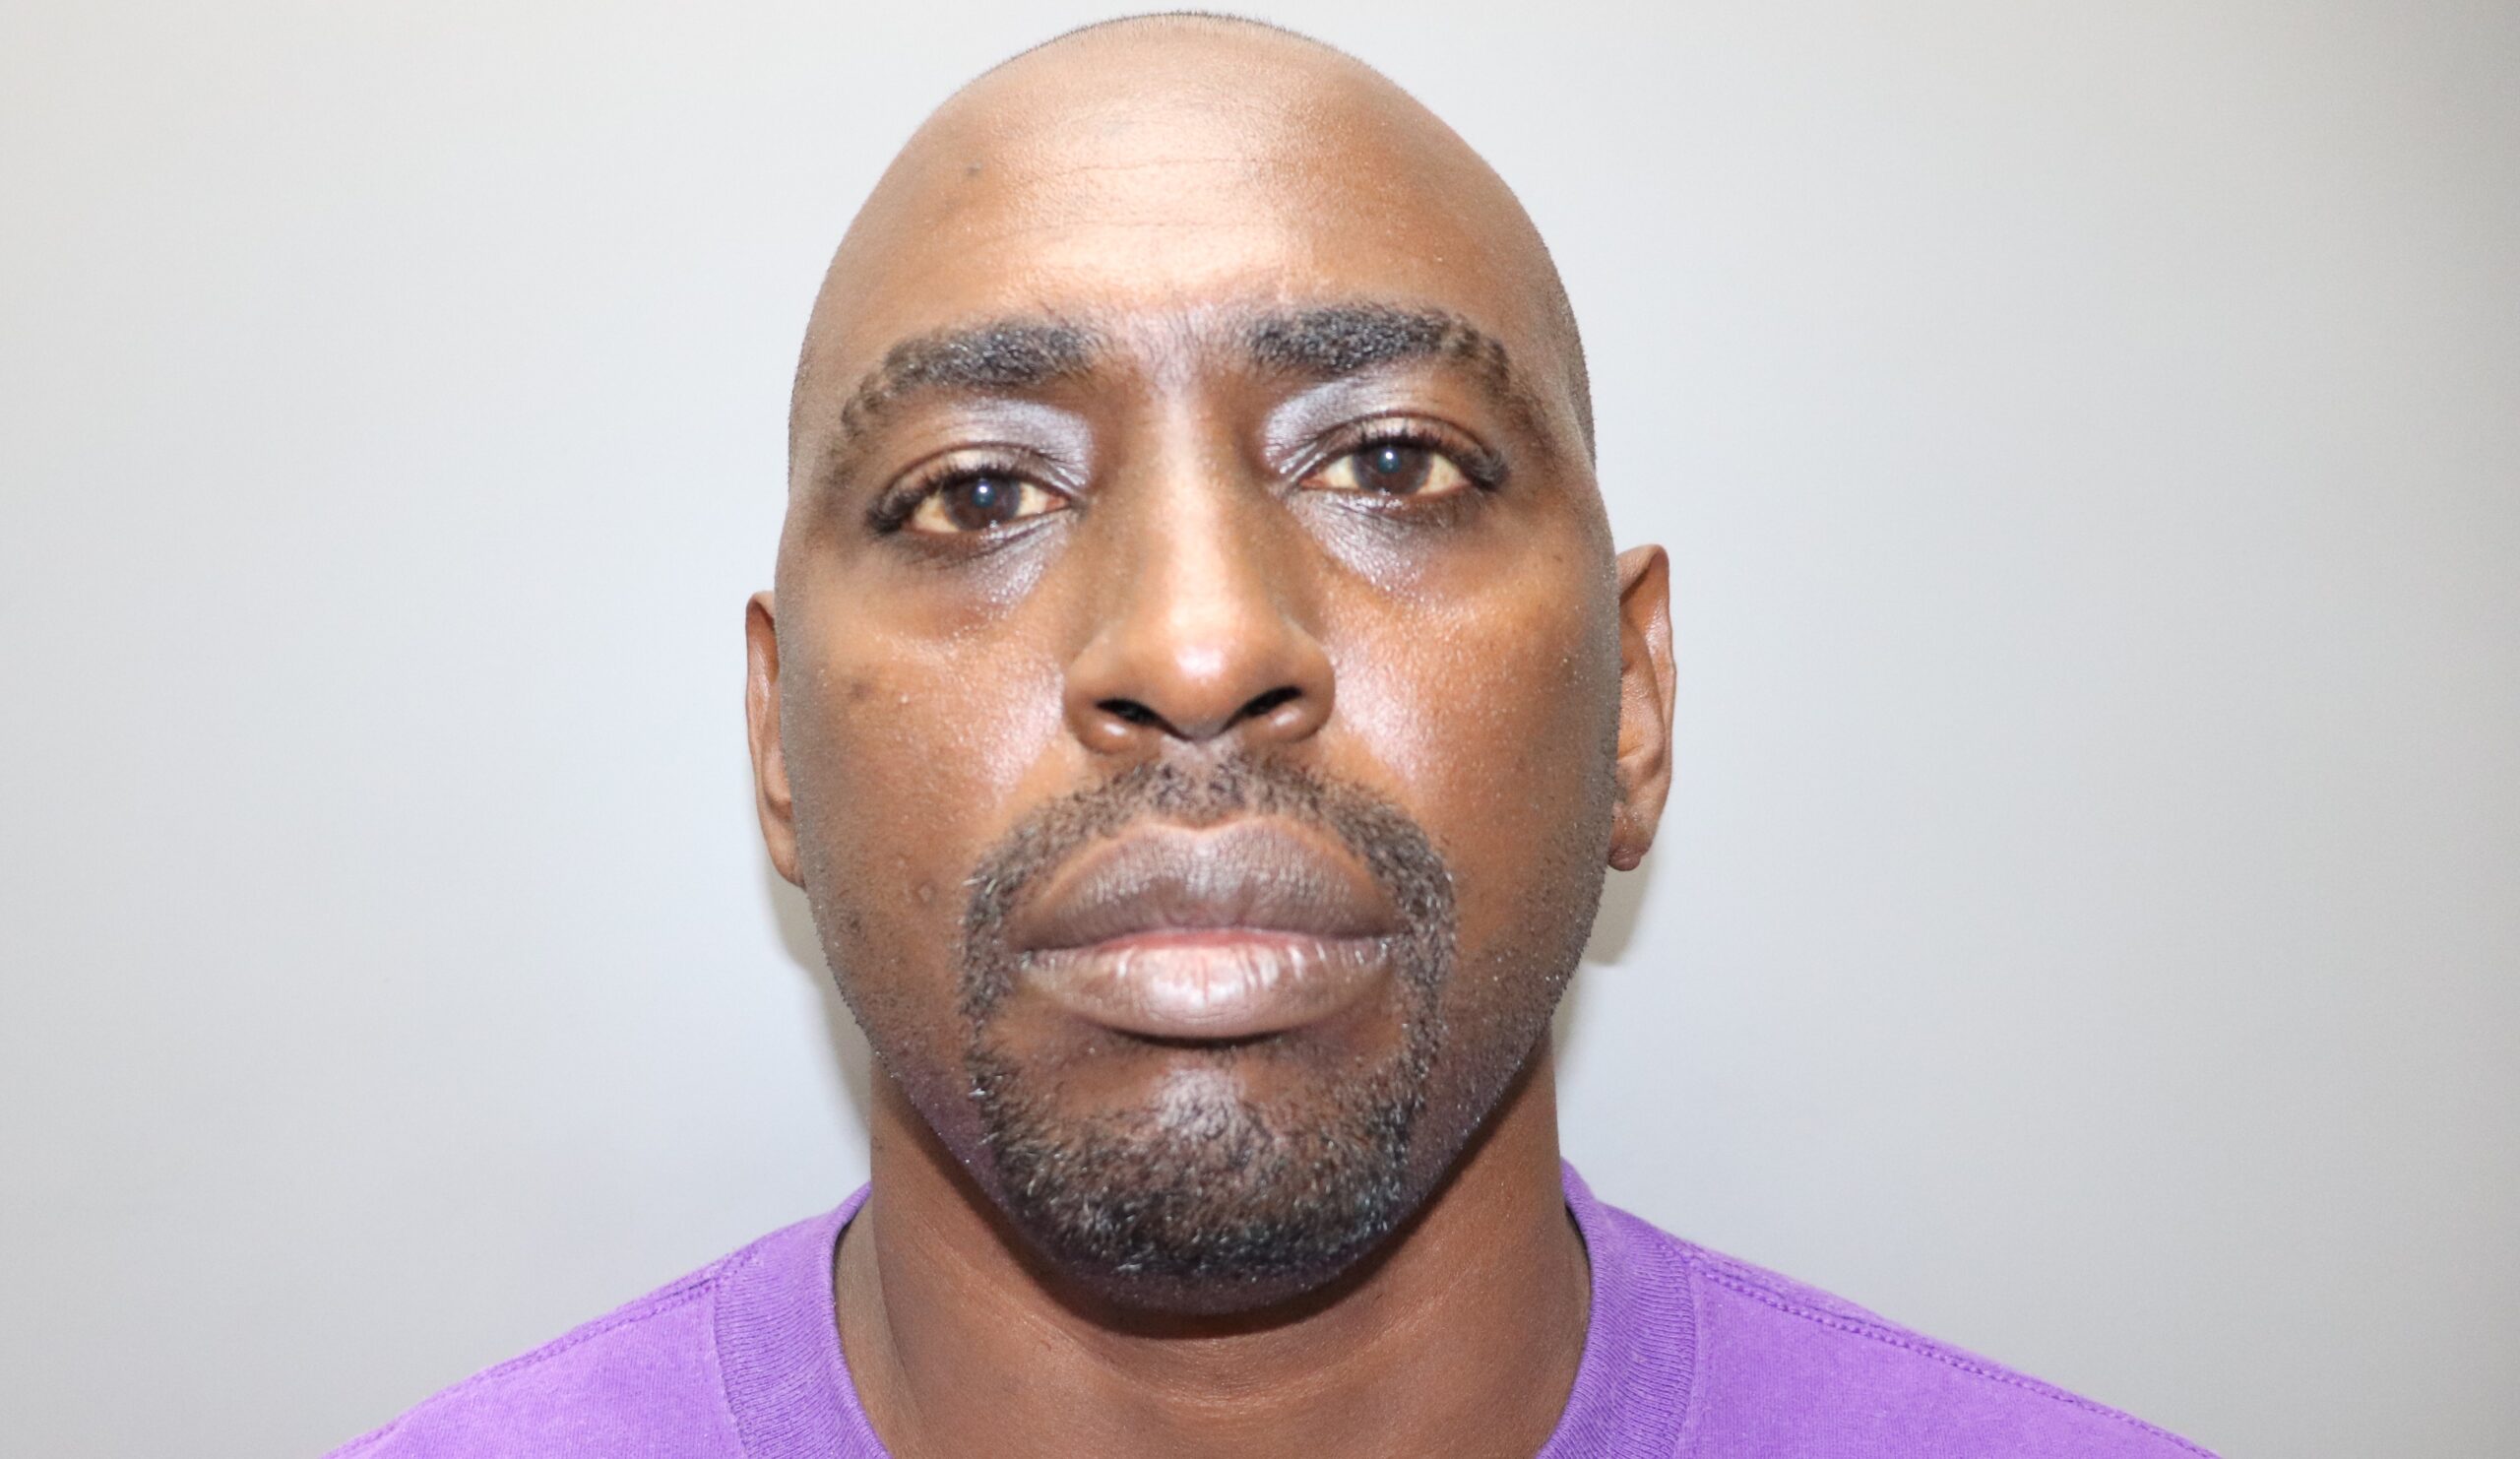 St. John Man Accused Of Series Of Rapes And Child Abuse Over 3-Year Period Arrested: VIPD